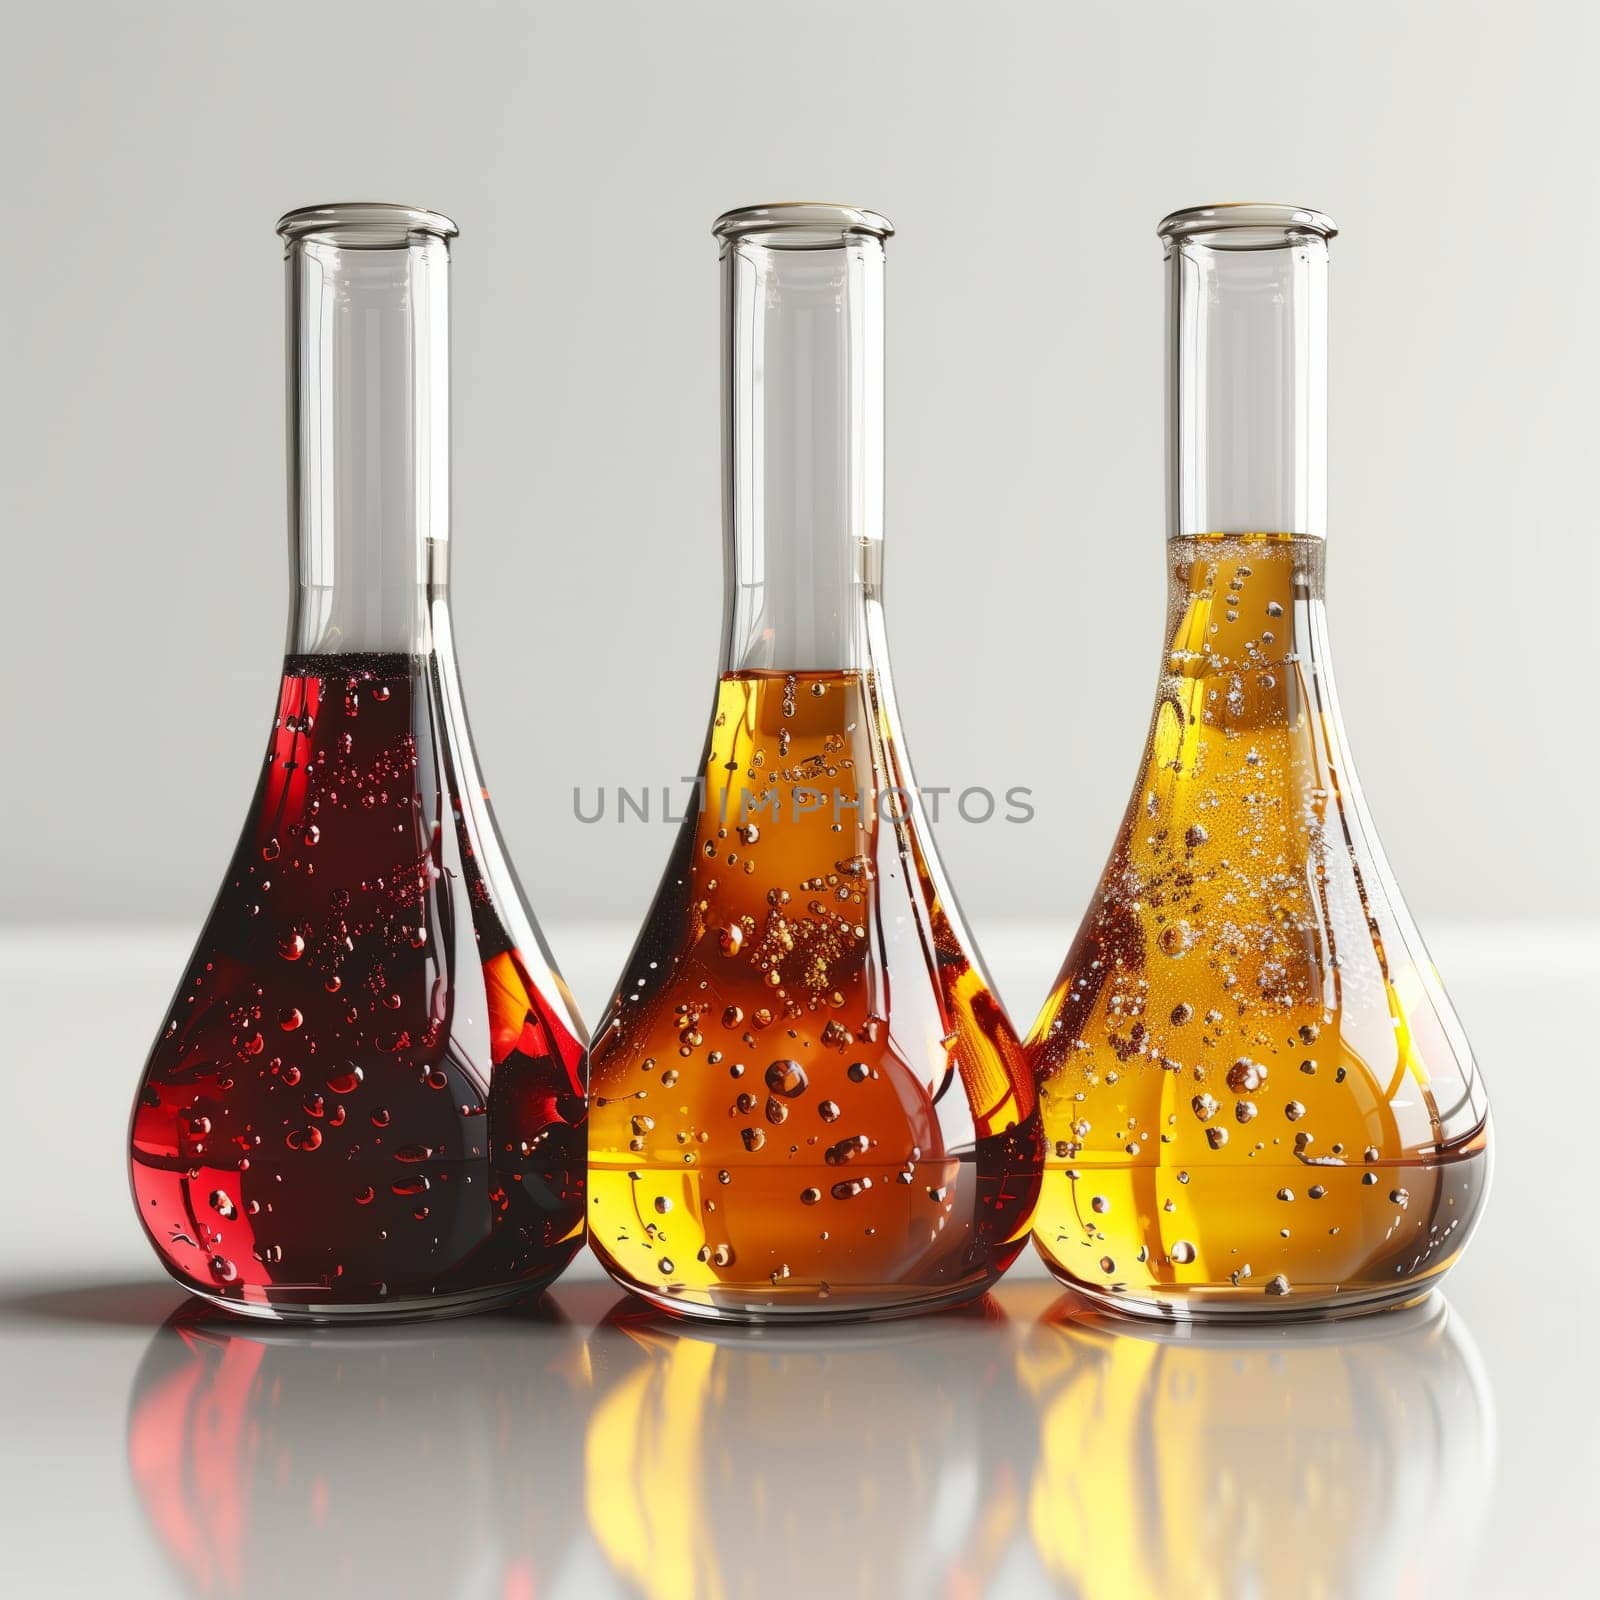 Three beakers with colorful liquids displayed on a table by richwolf